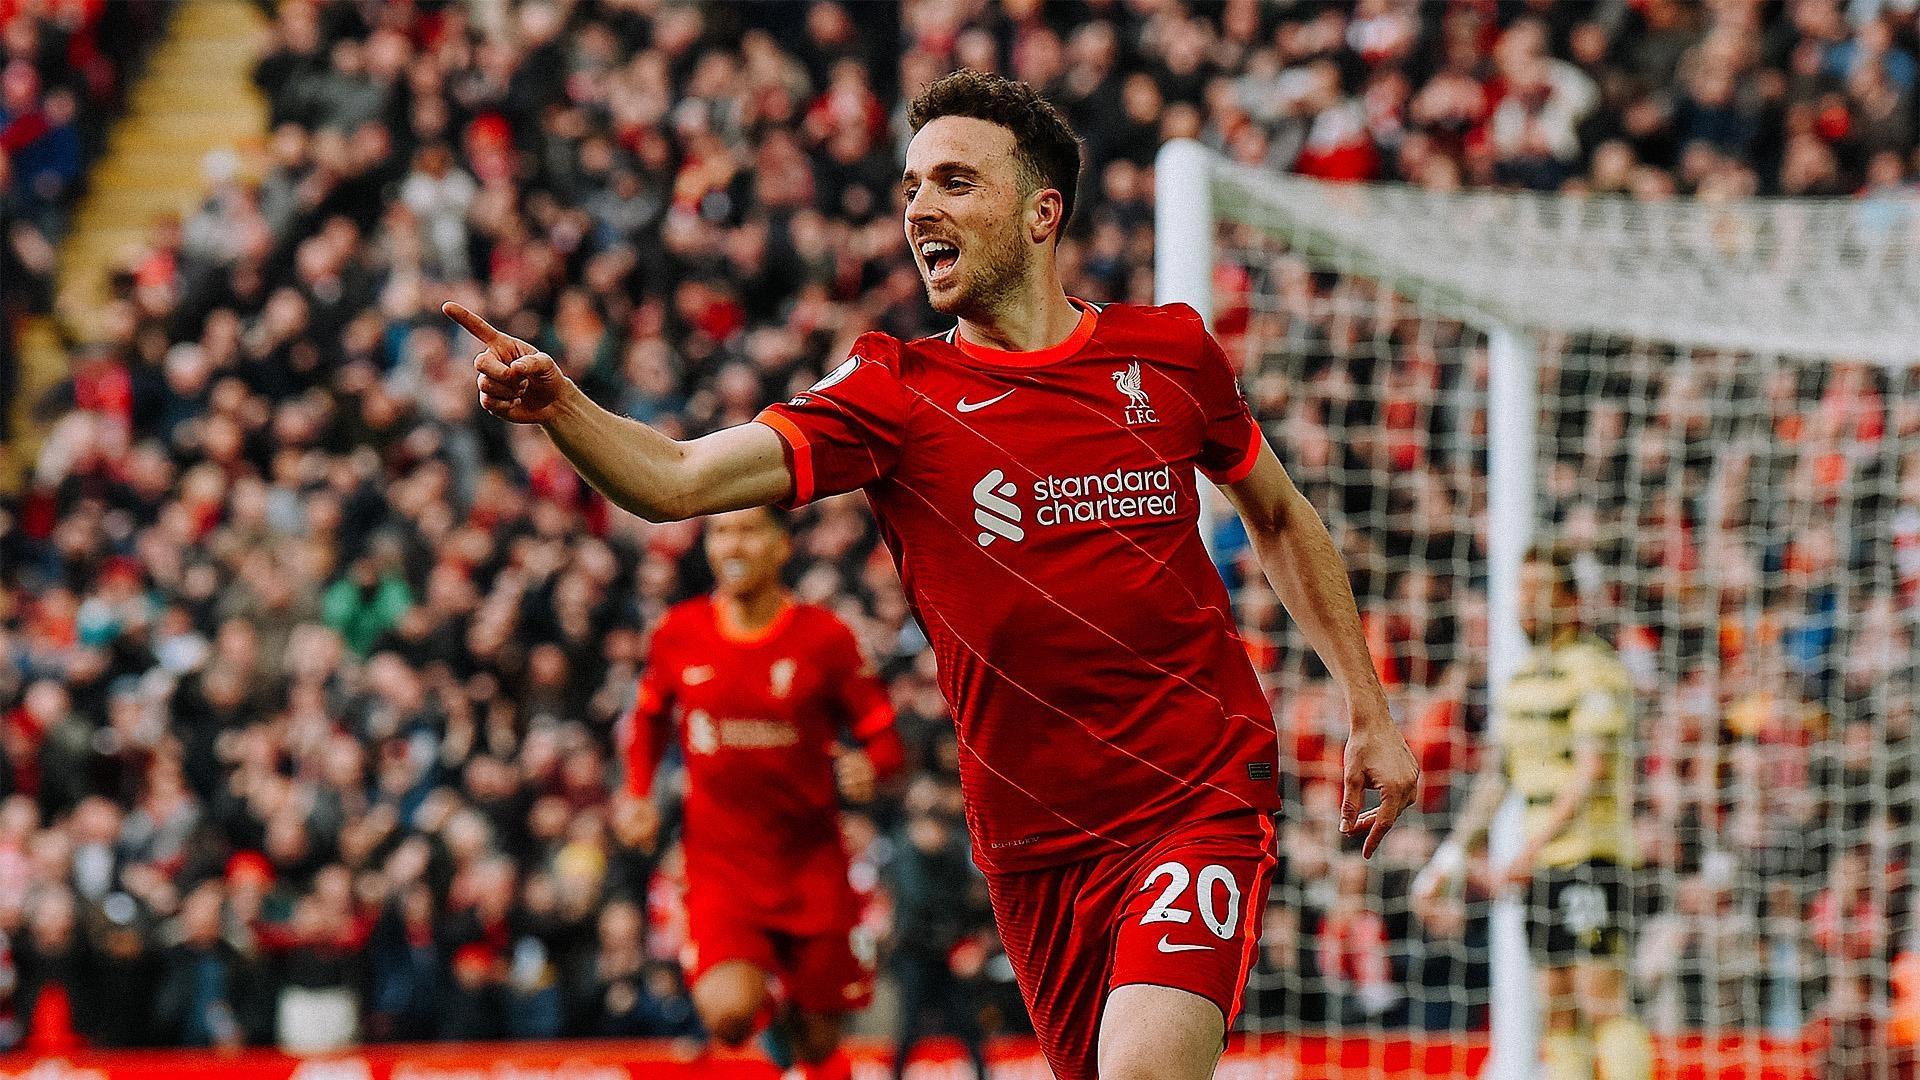 Liverpool FC - Diogo Jota: I told Joe Gomez he would get an assist!